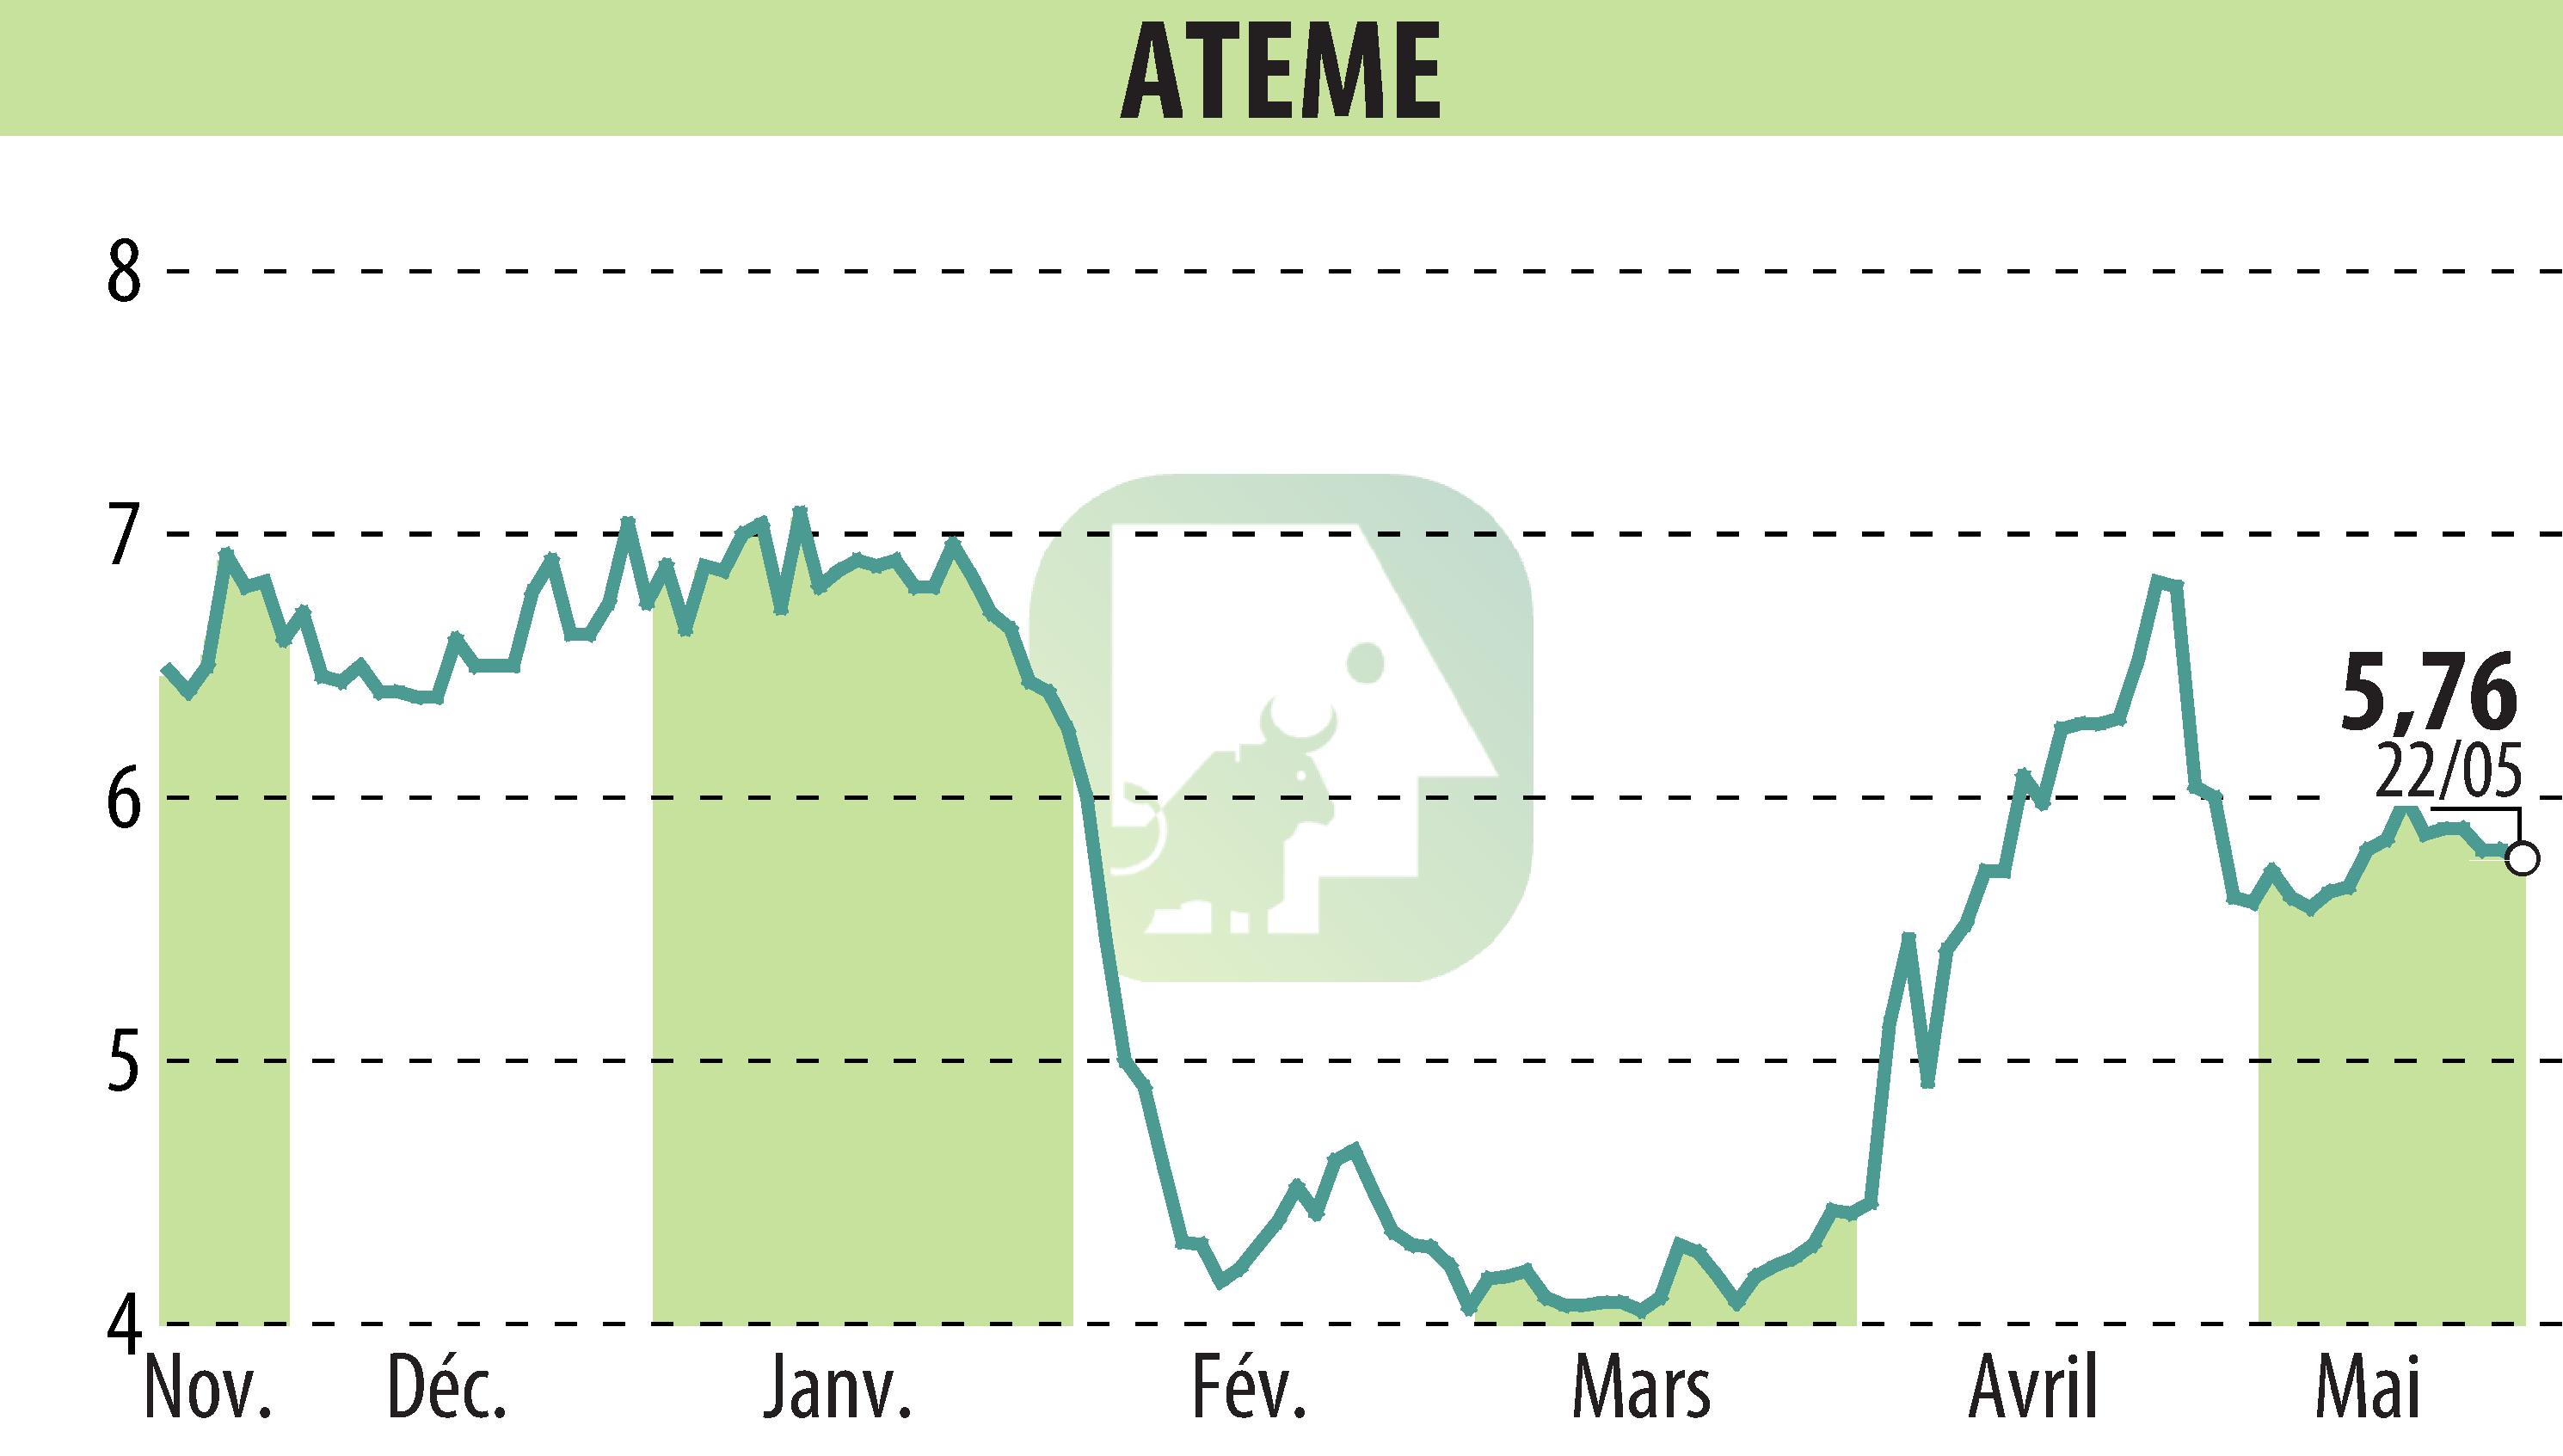 Stock price chart of ATEME (EPA:ATEME) showing fluctuations.